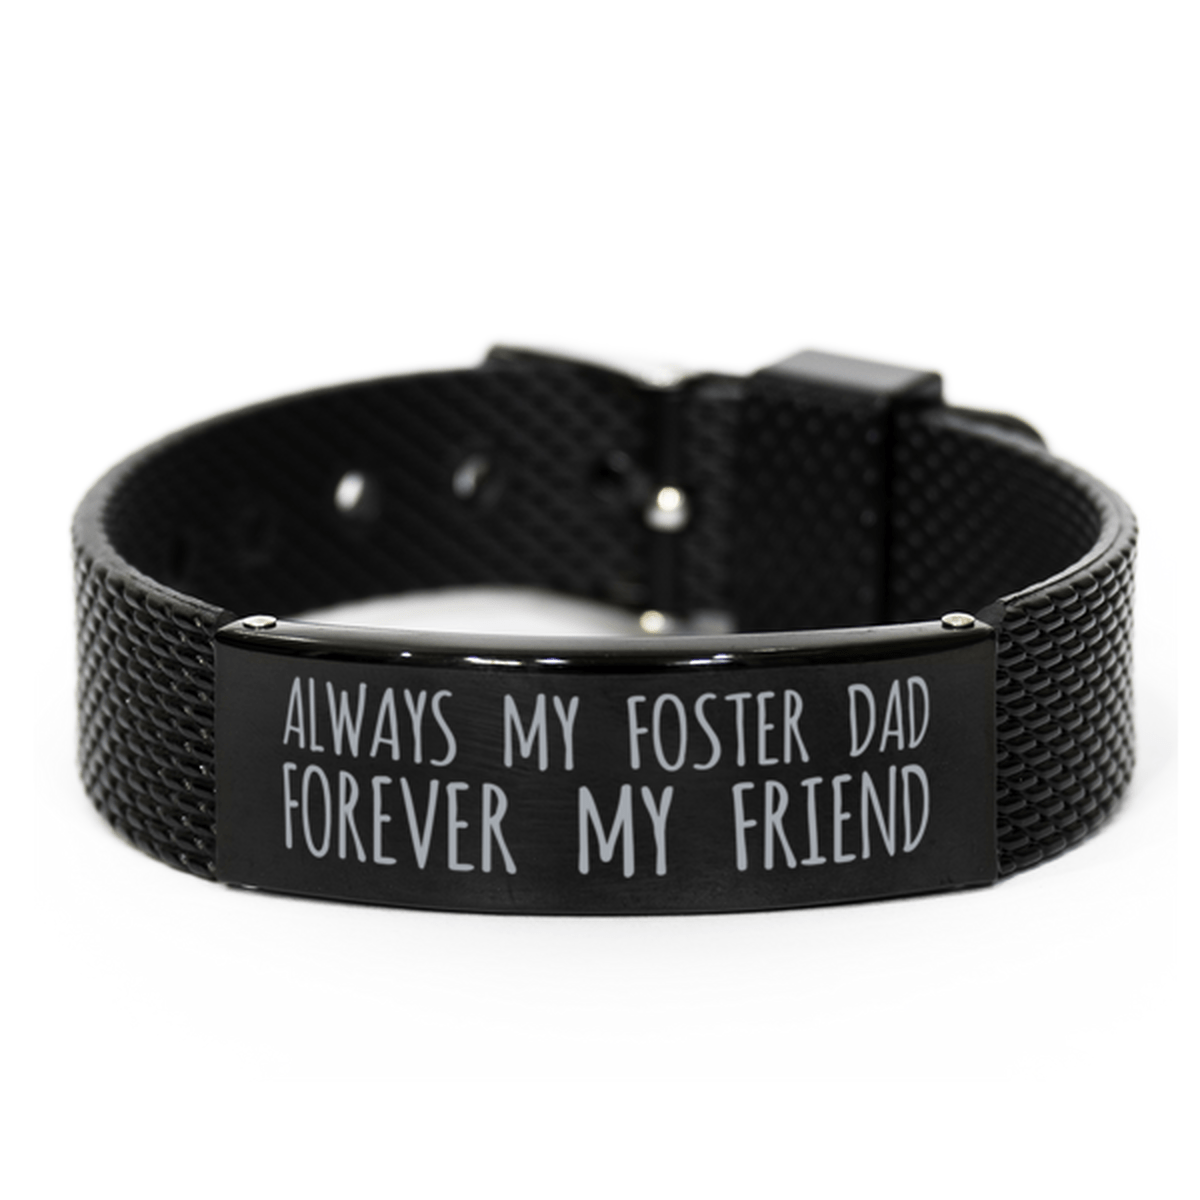 Inspirational Foster Dad Black Shark Mesh Bracelet, Always My Foster Dad Forever My Friend, Best Birthday Gifts for Family Friends